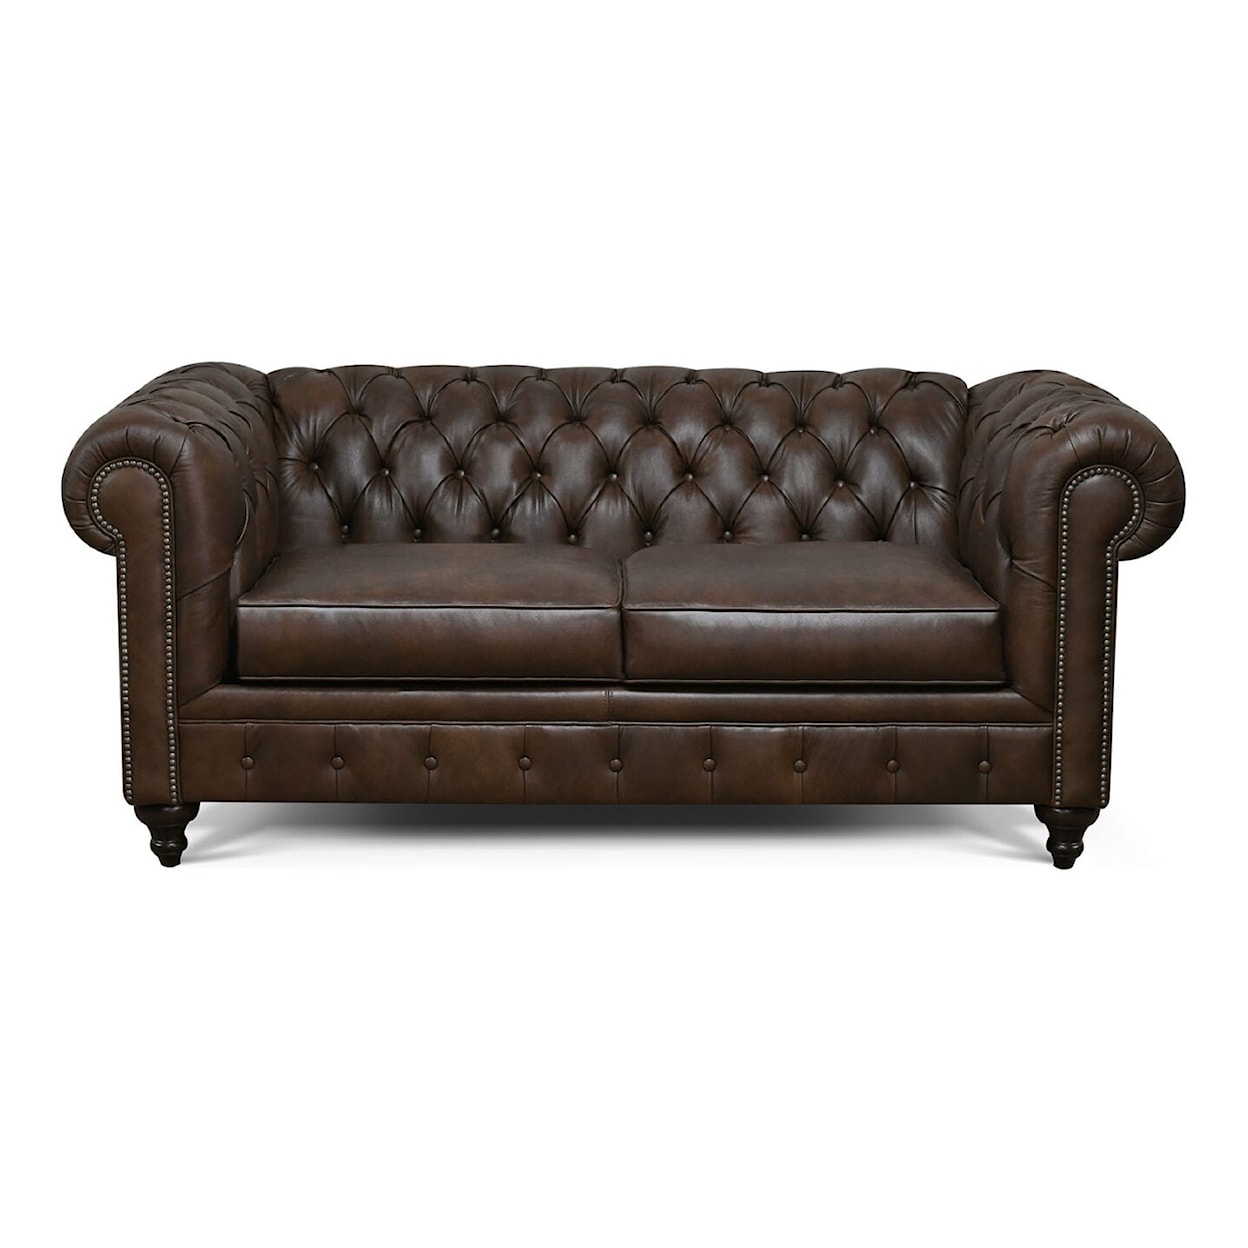 Dimensions 2R00/AL Series Chesterfield Loveseat with Nailheads